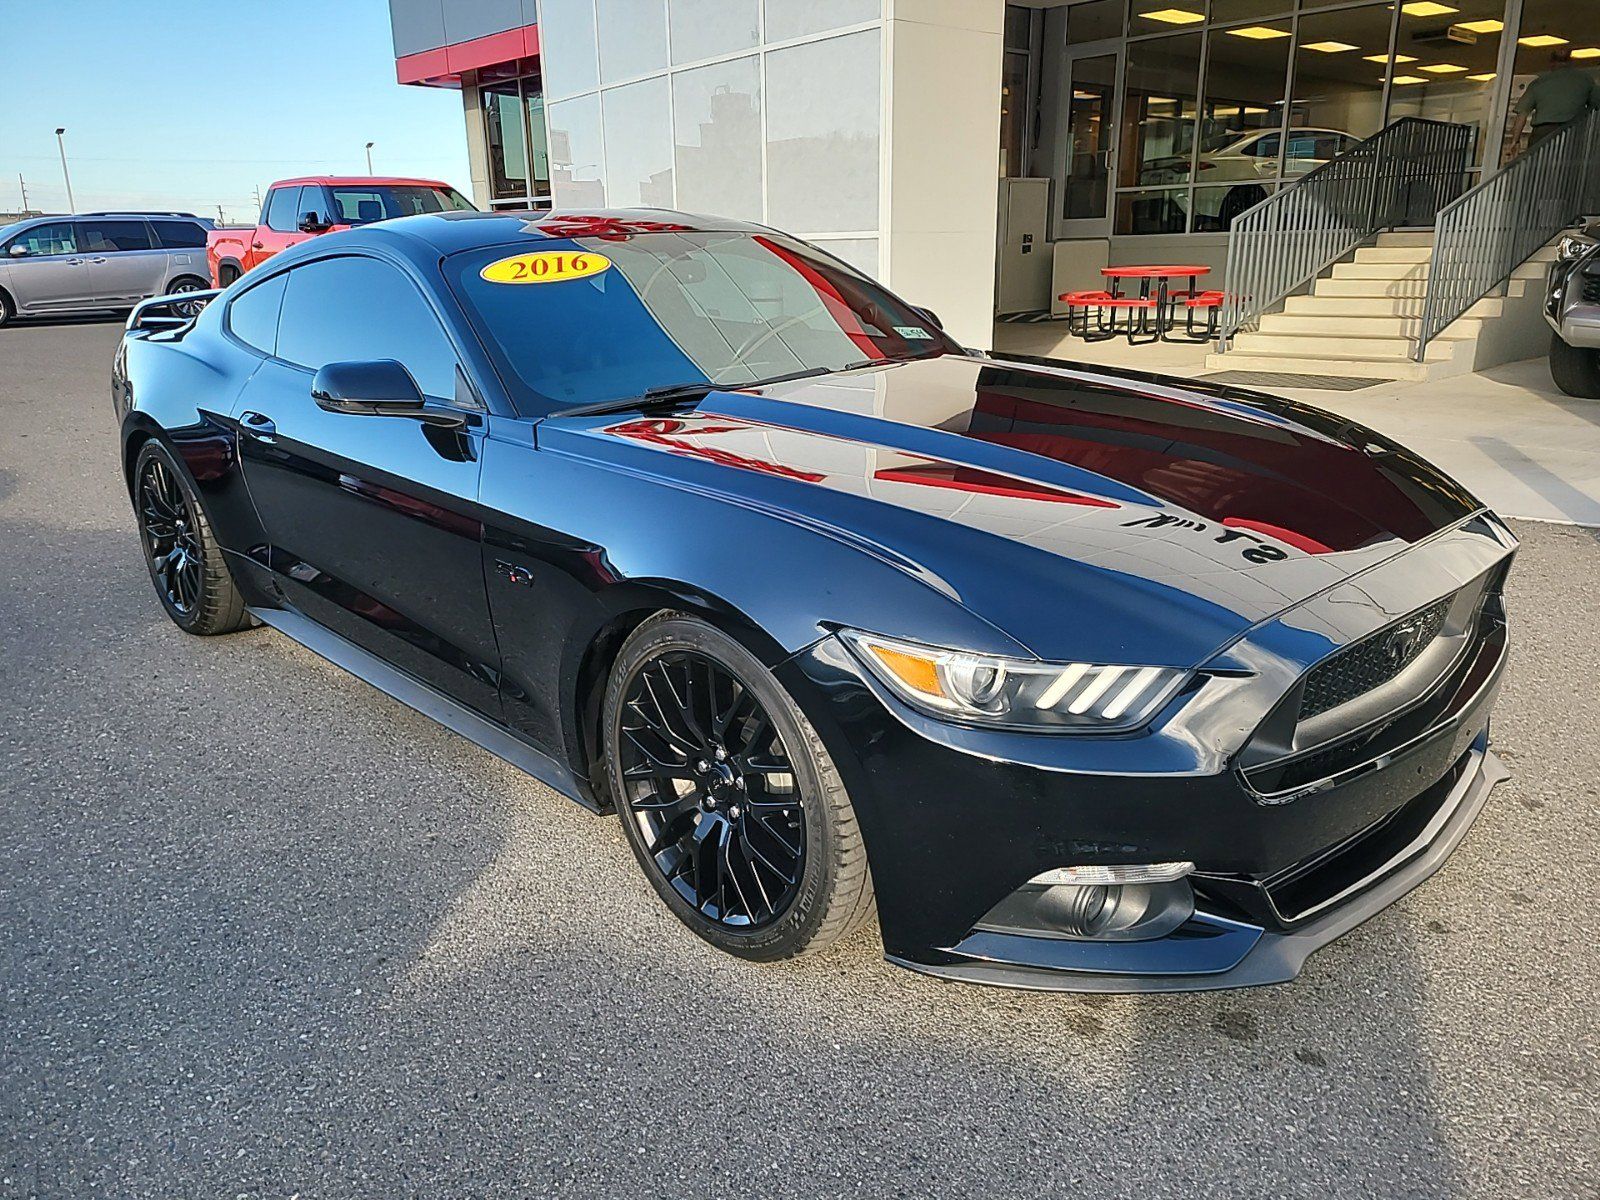 2016 - Ford - Mustang - $30,399